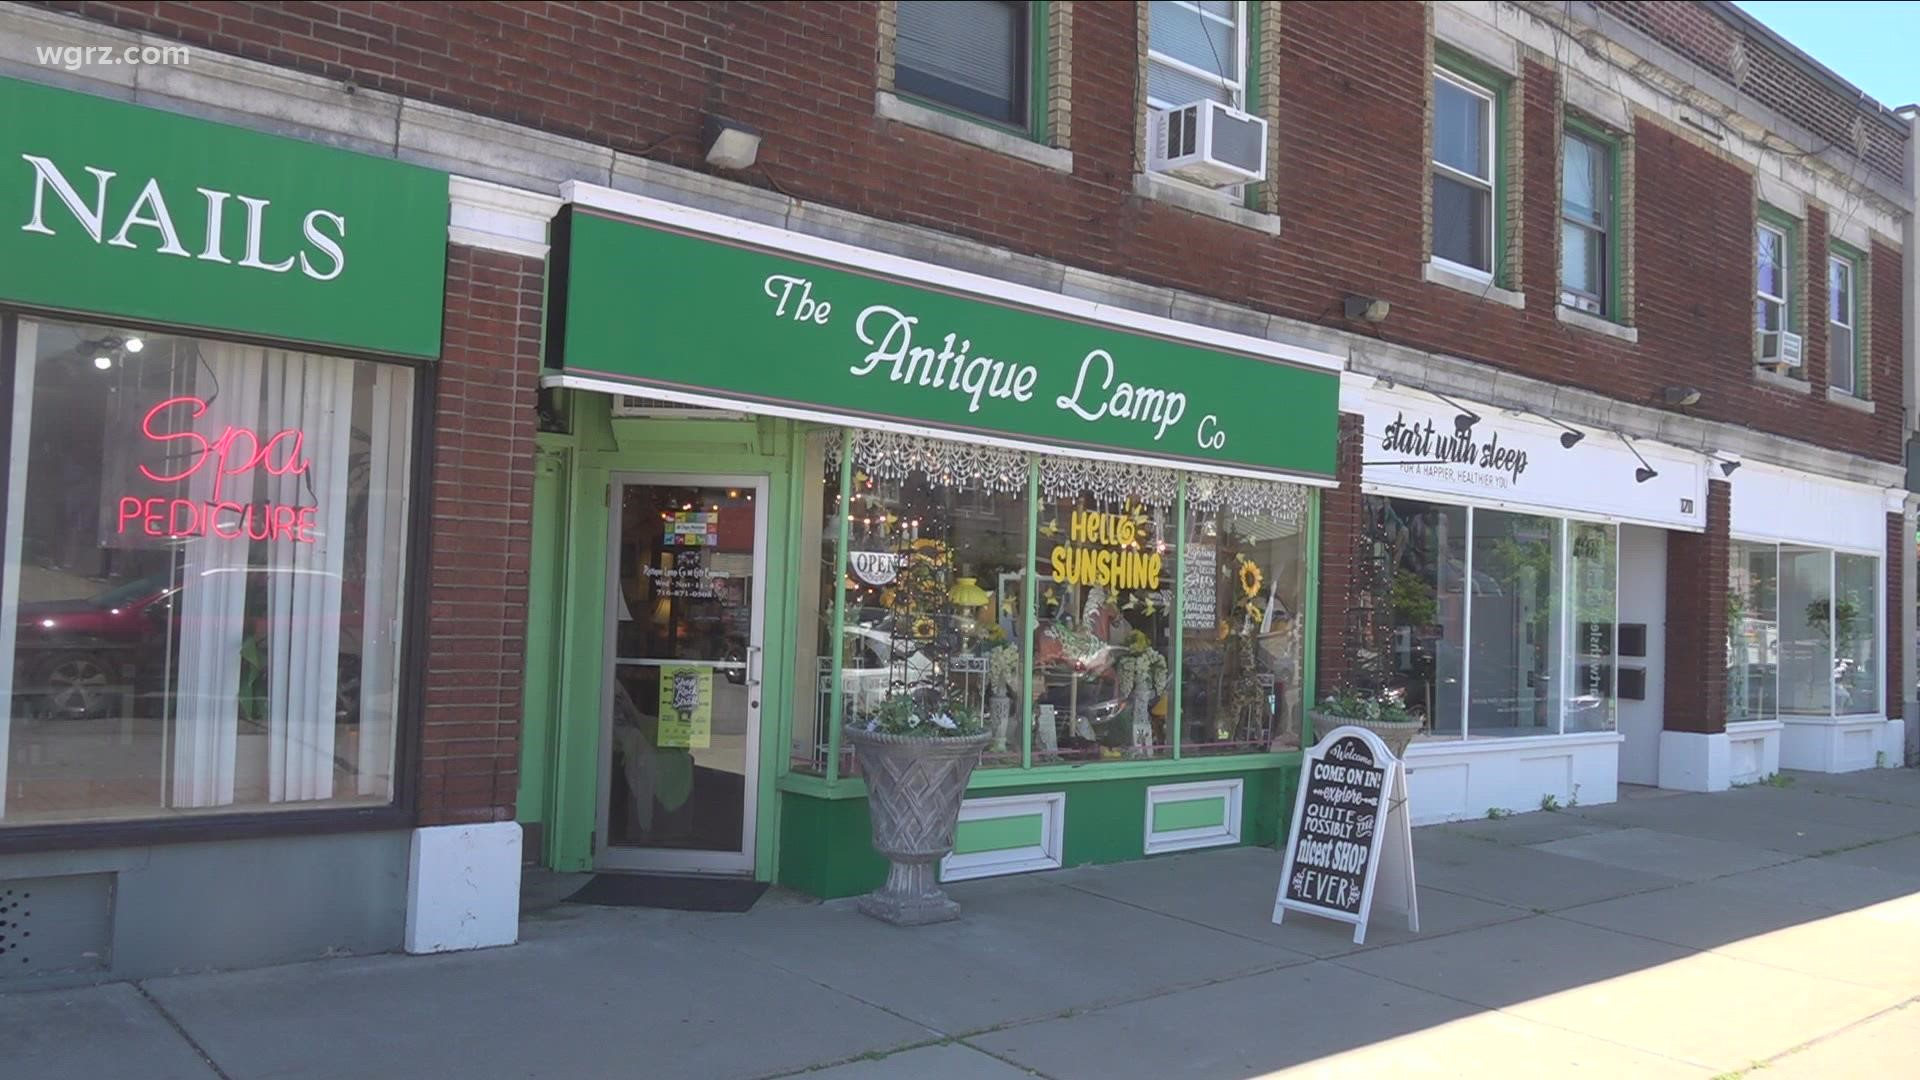 Not only is the store celebrating 25 years in business but the couple behind has been together for almost 50 years.